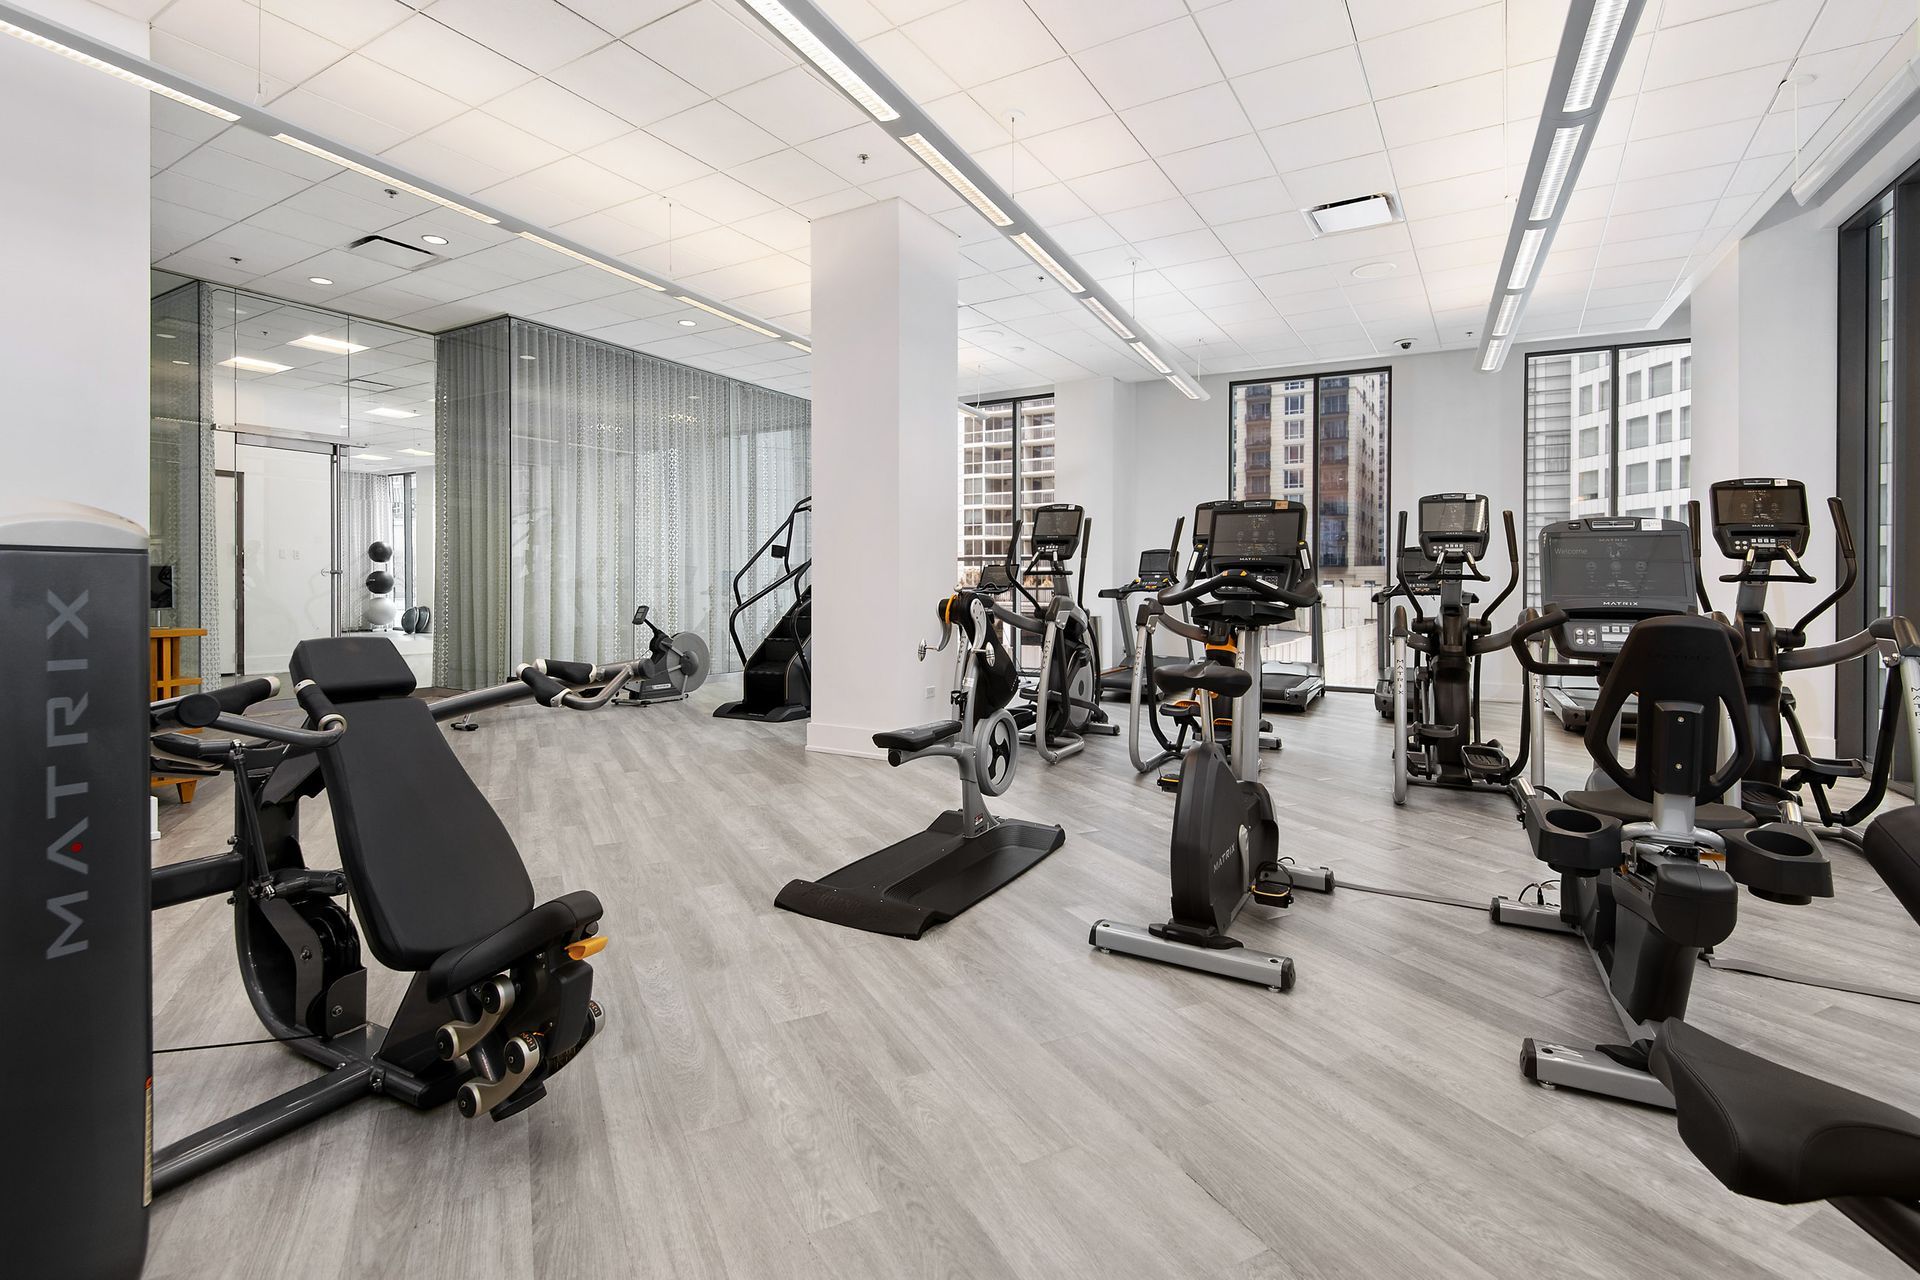 A large gym filled with lots of exercise equipment.